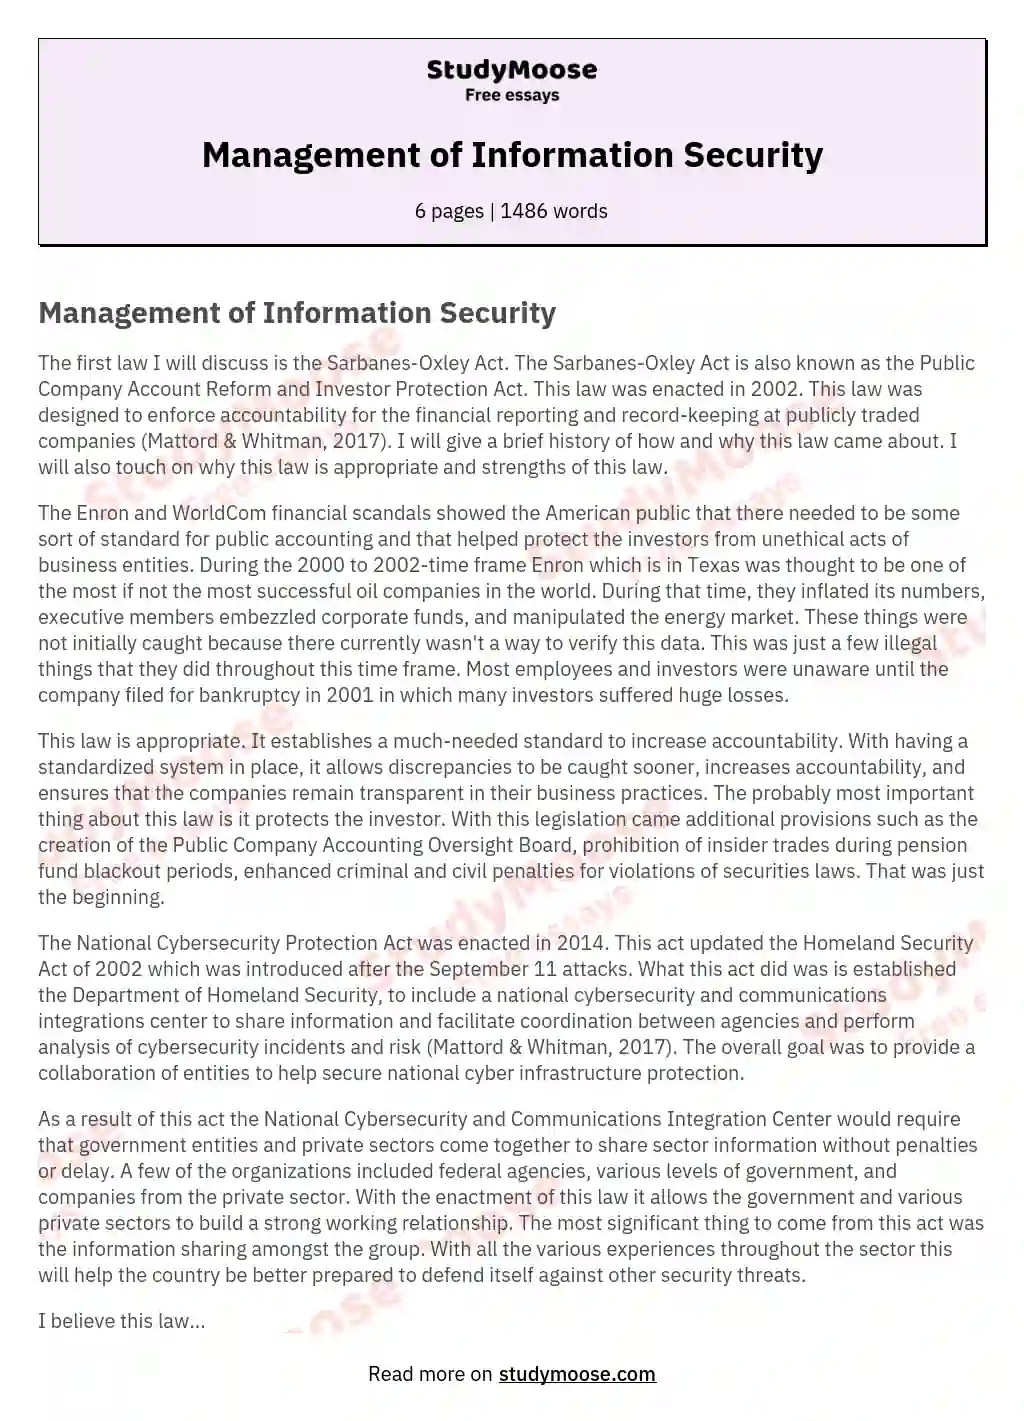 Management of Information Security essay